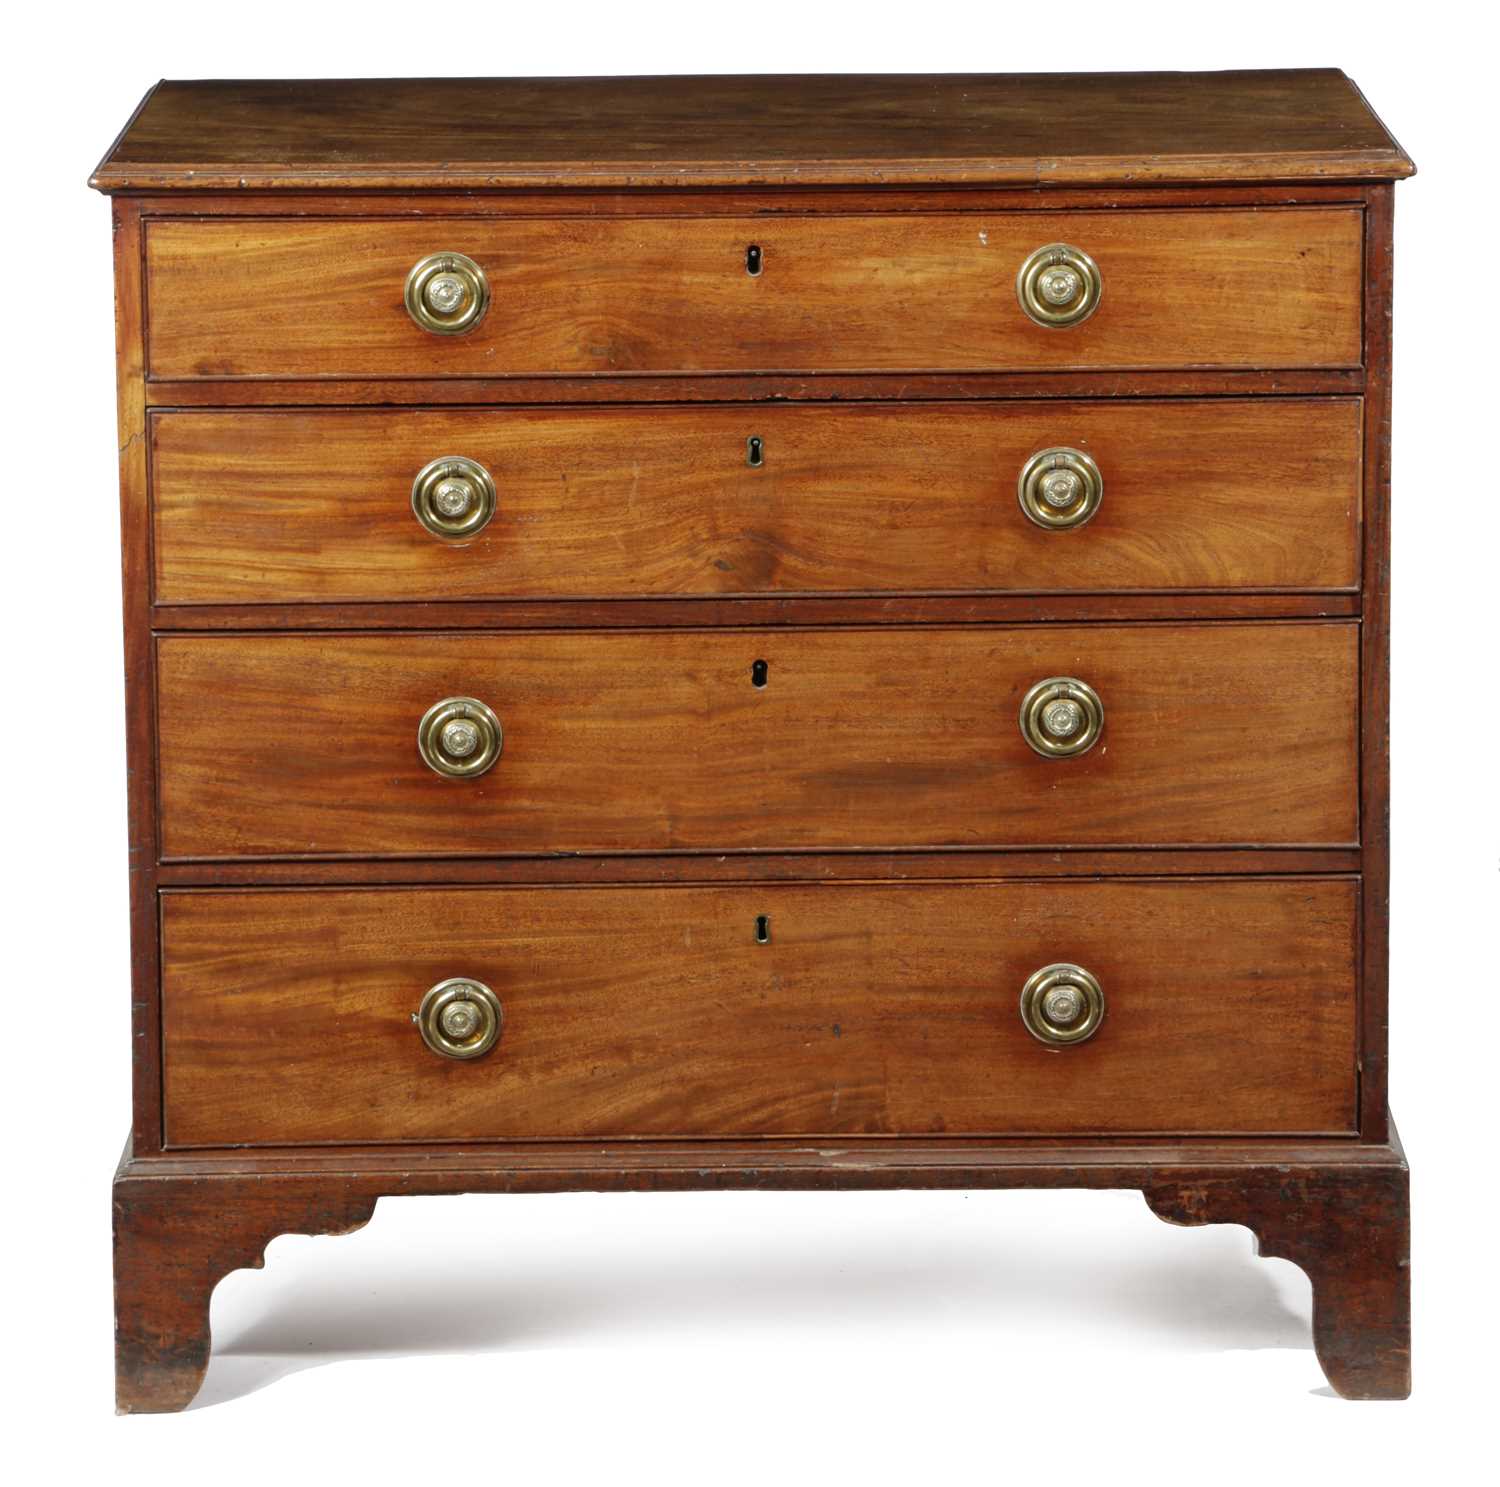 A GEORGE III MAHOGANY CHEST LATE 18TH CENTURY of four long graduated drawers 91.5cm high, 94.7cm